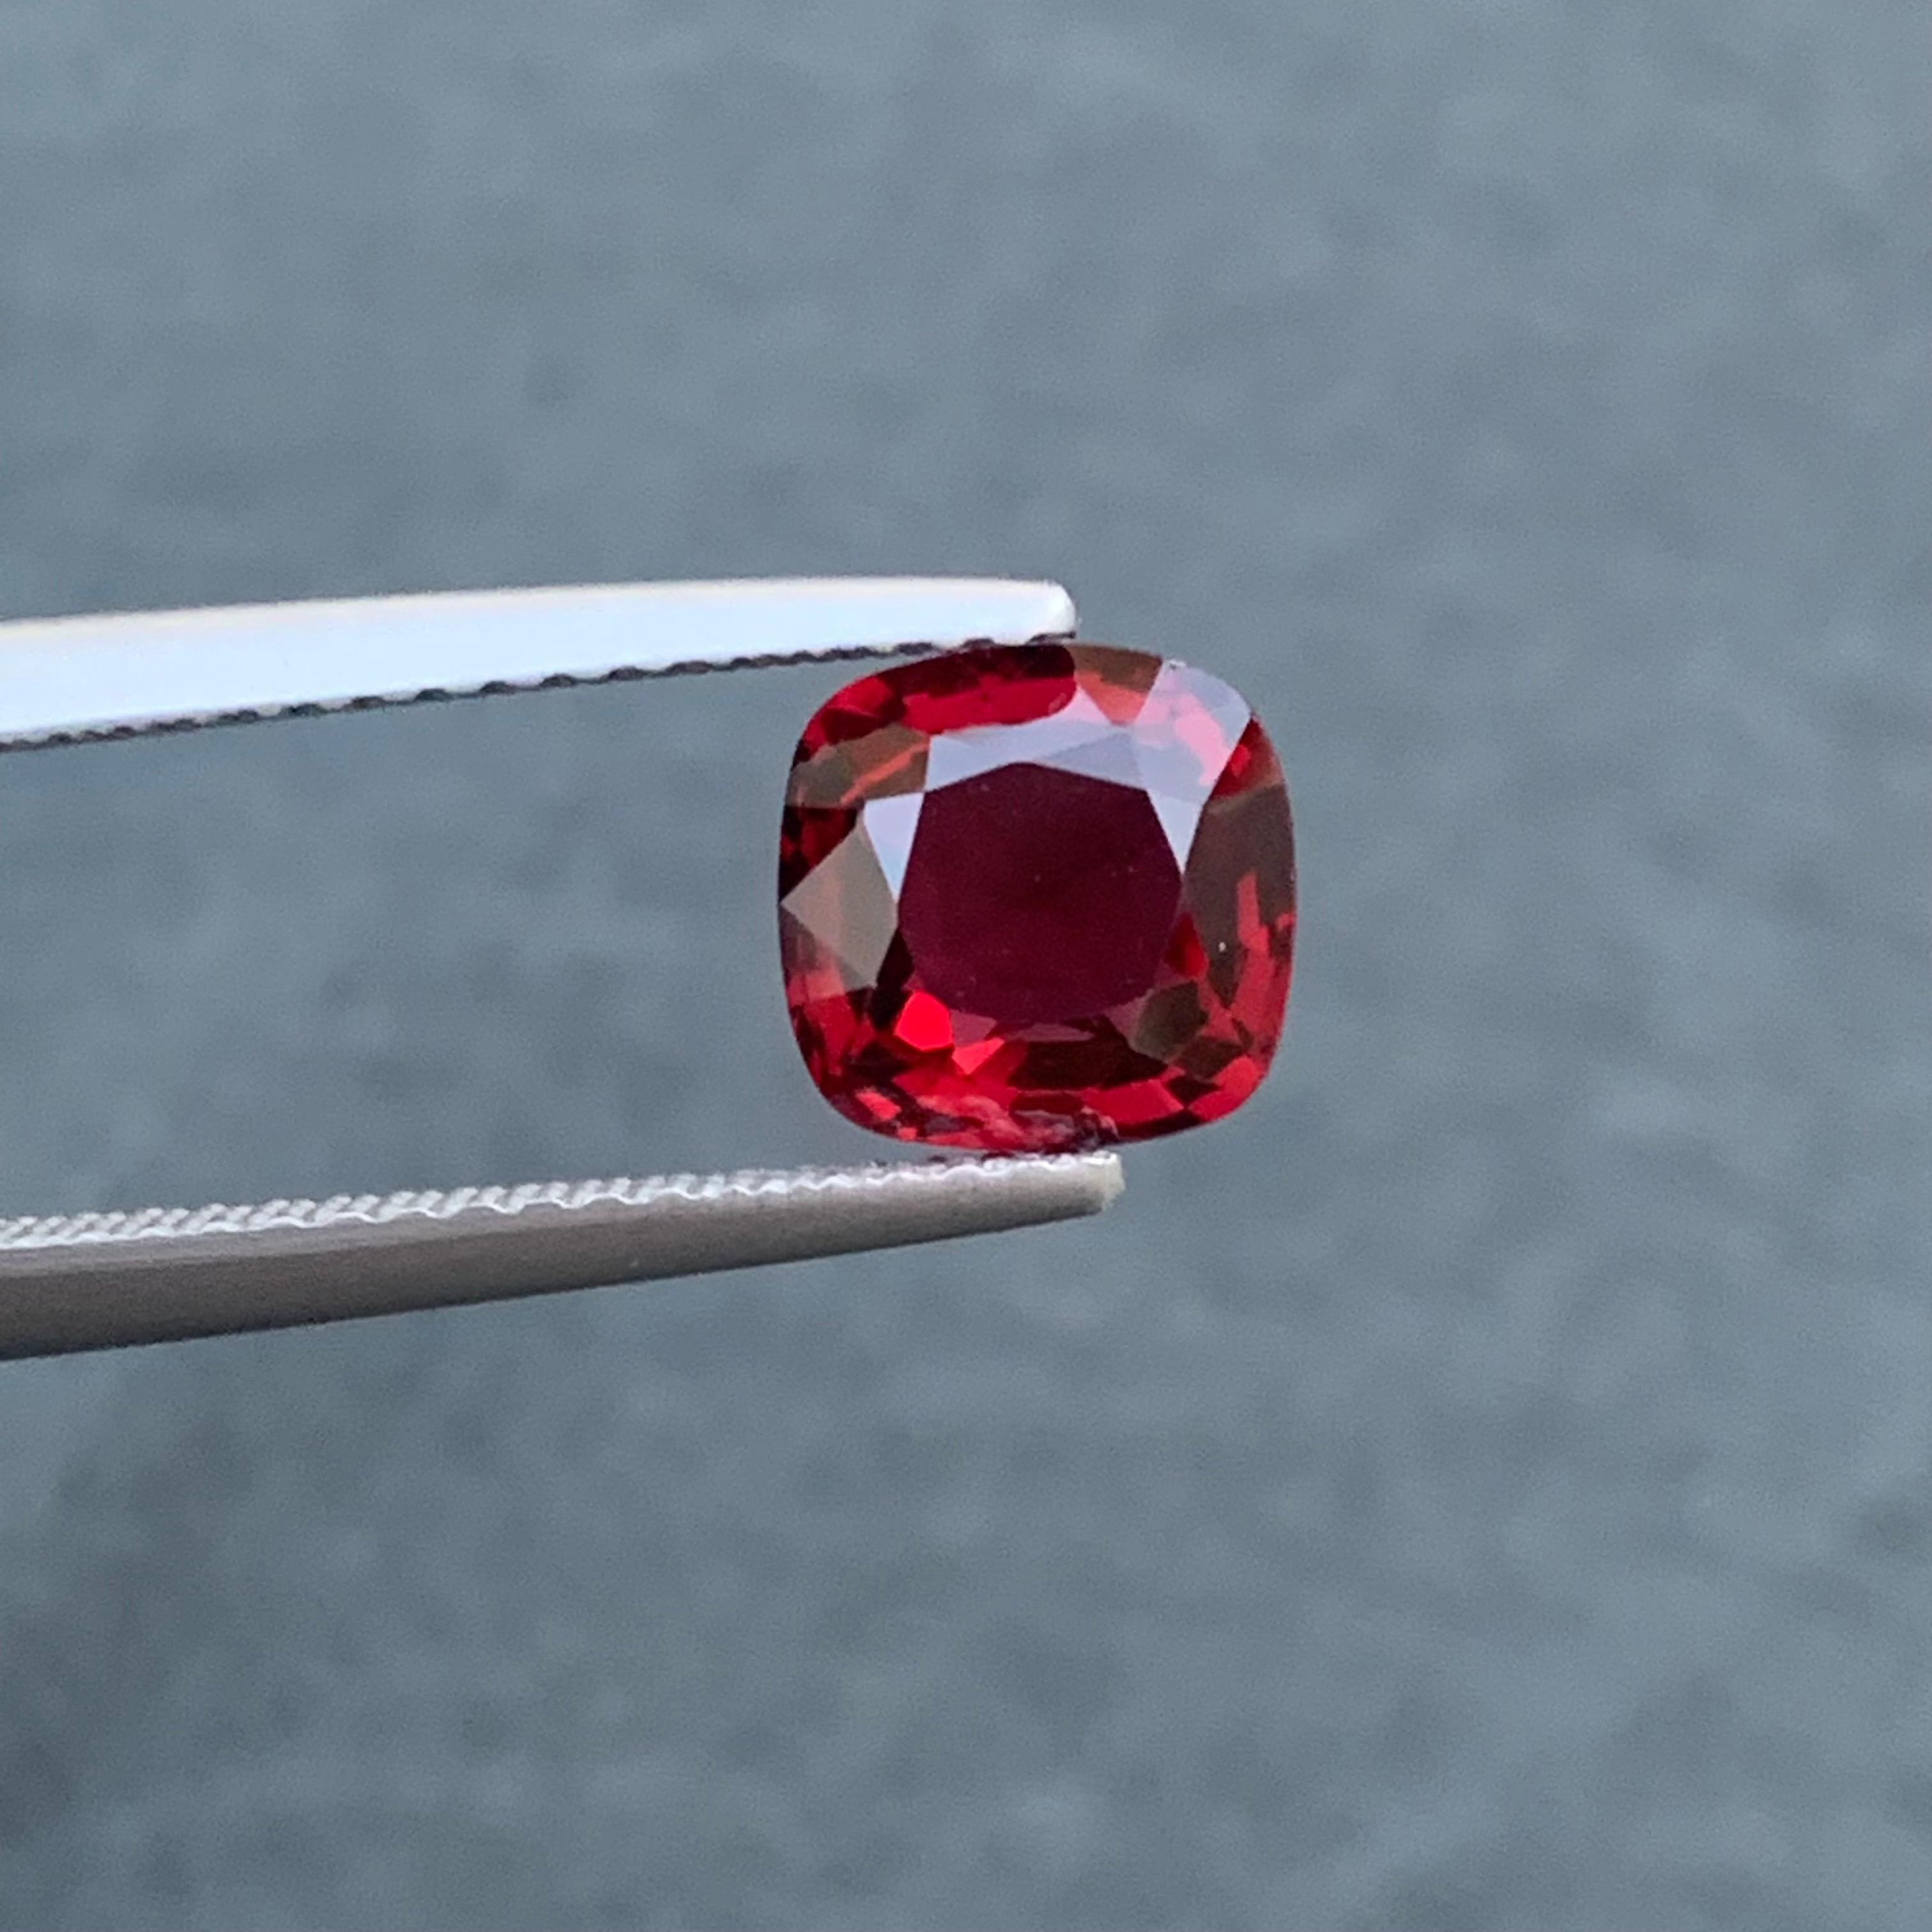 Baroque Stunning 1.60 Carat Natural Loose Red Spinel from Myanmar Burma Cushion Shape For Sale